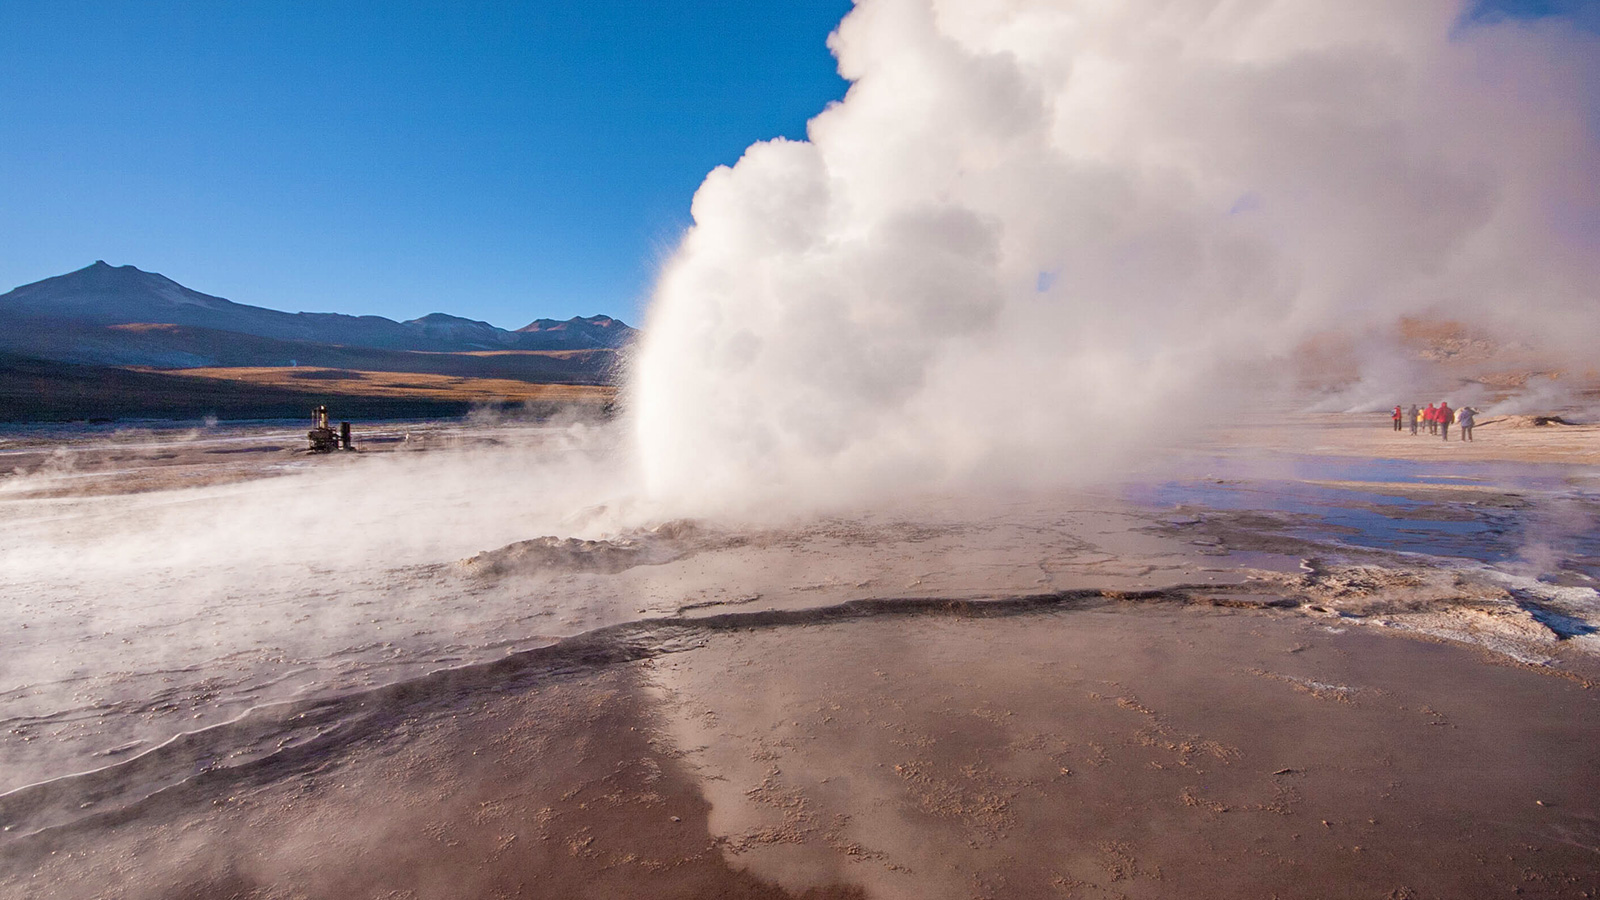 Steam rises from an erupting geyser high in the Andes mountains in Chile